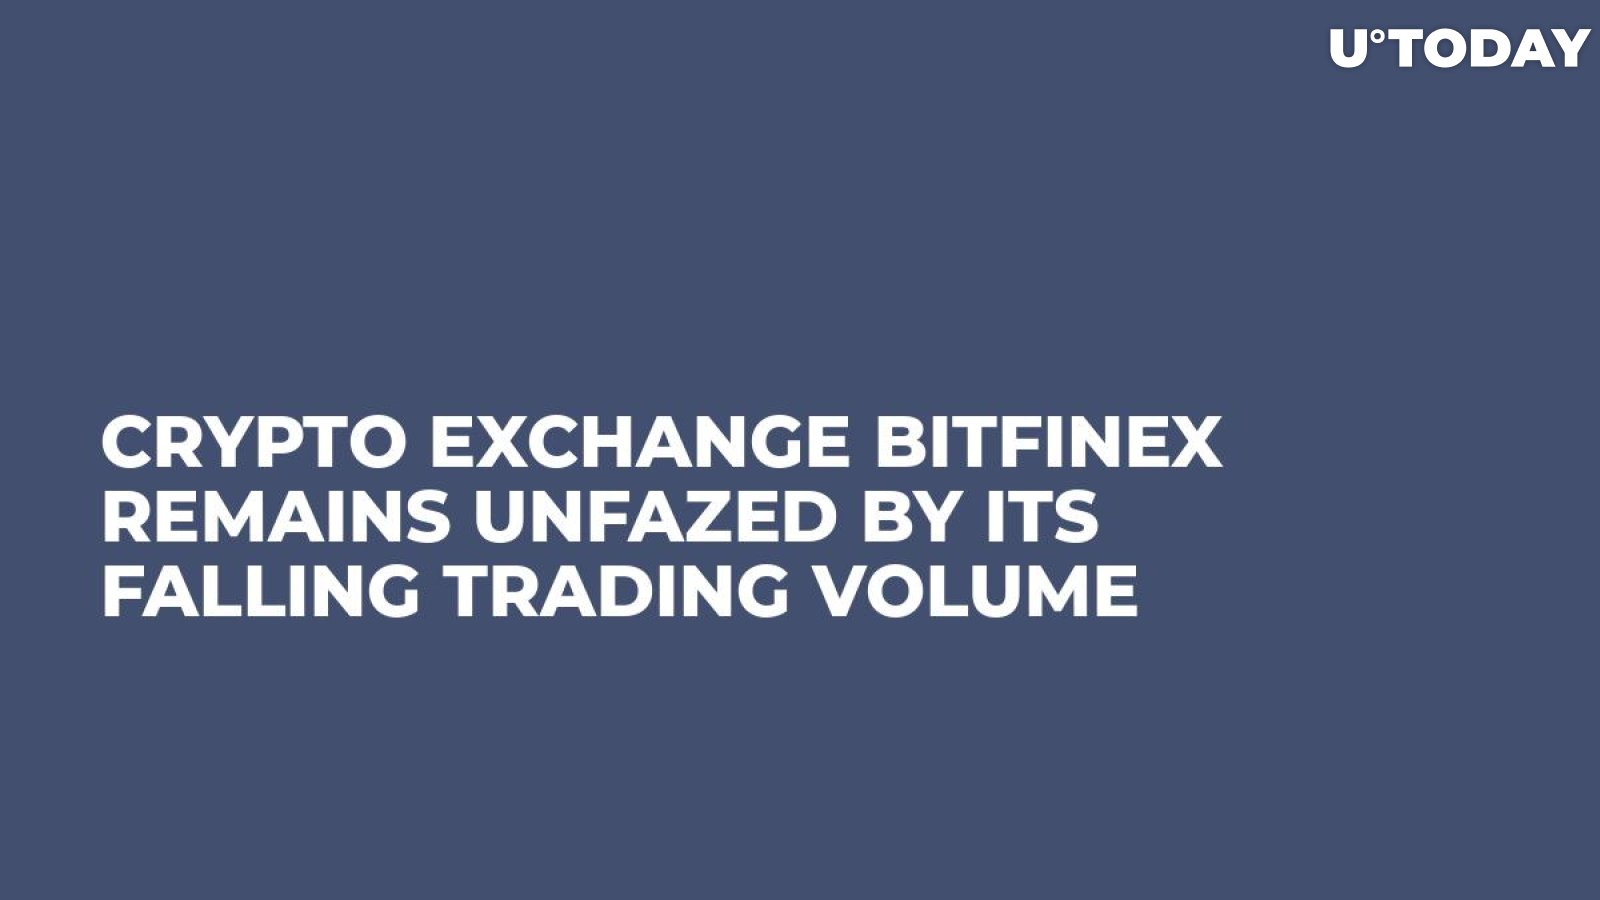 Crypto Exchange Bitfinex Remains Unfazed by Its Falling Trading Volume